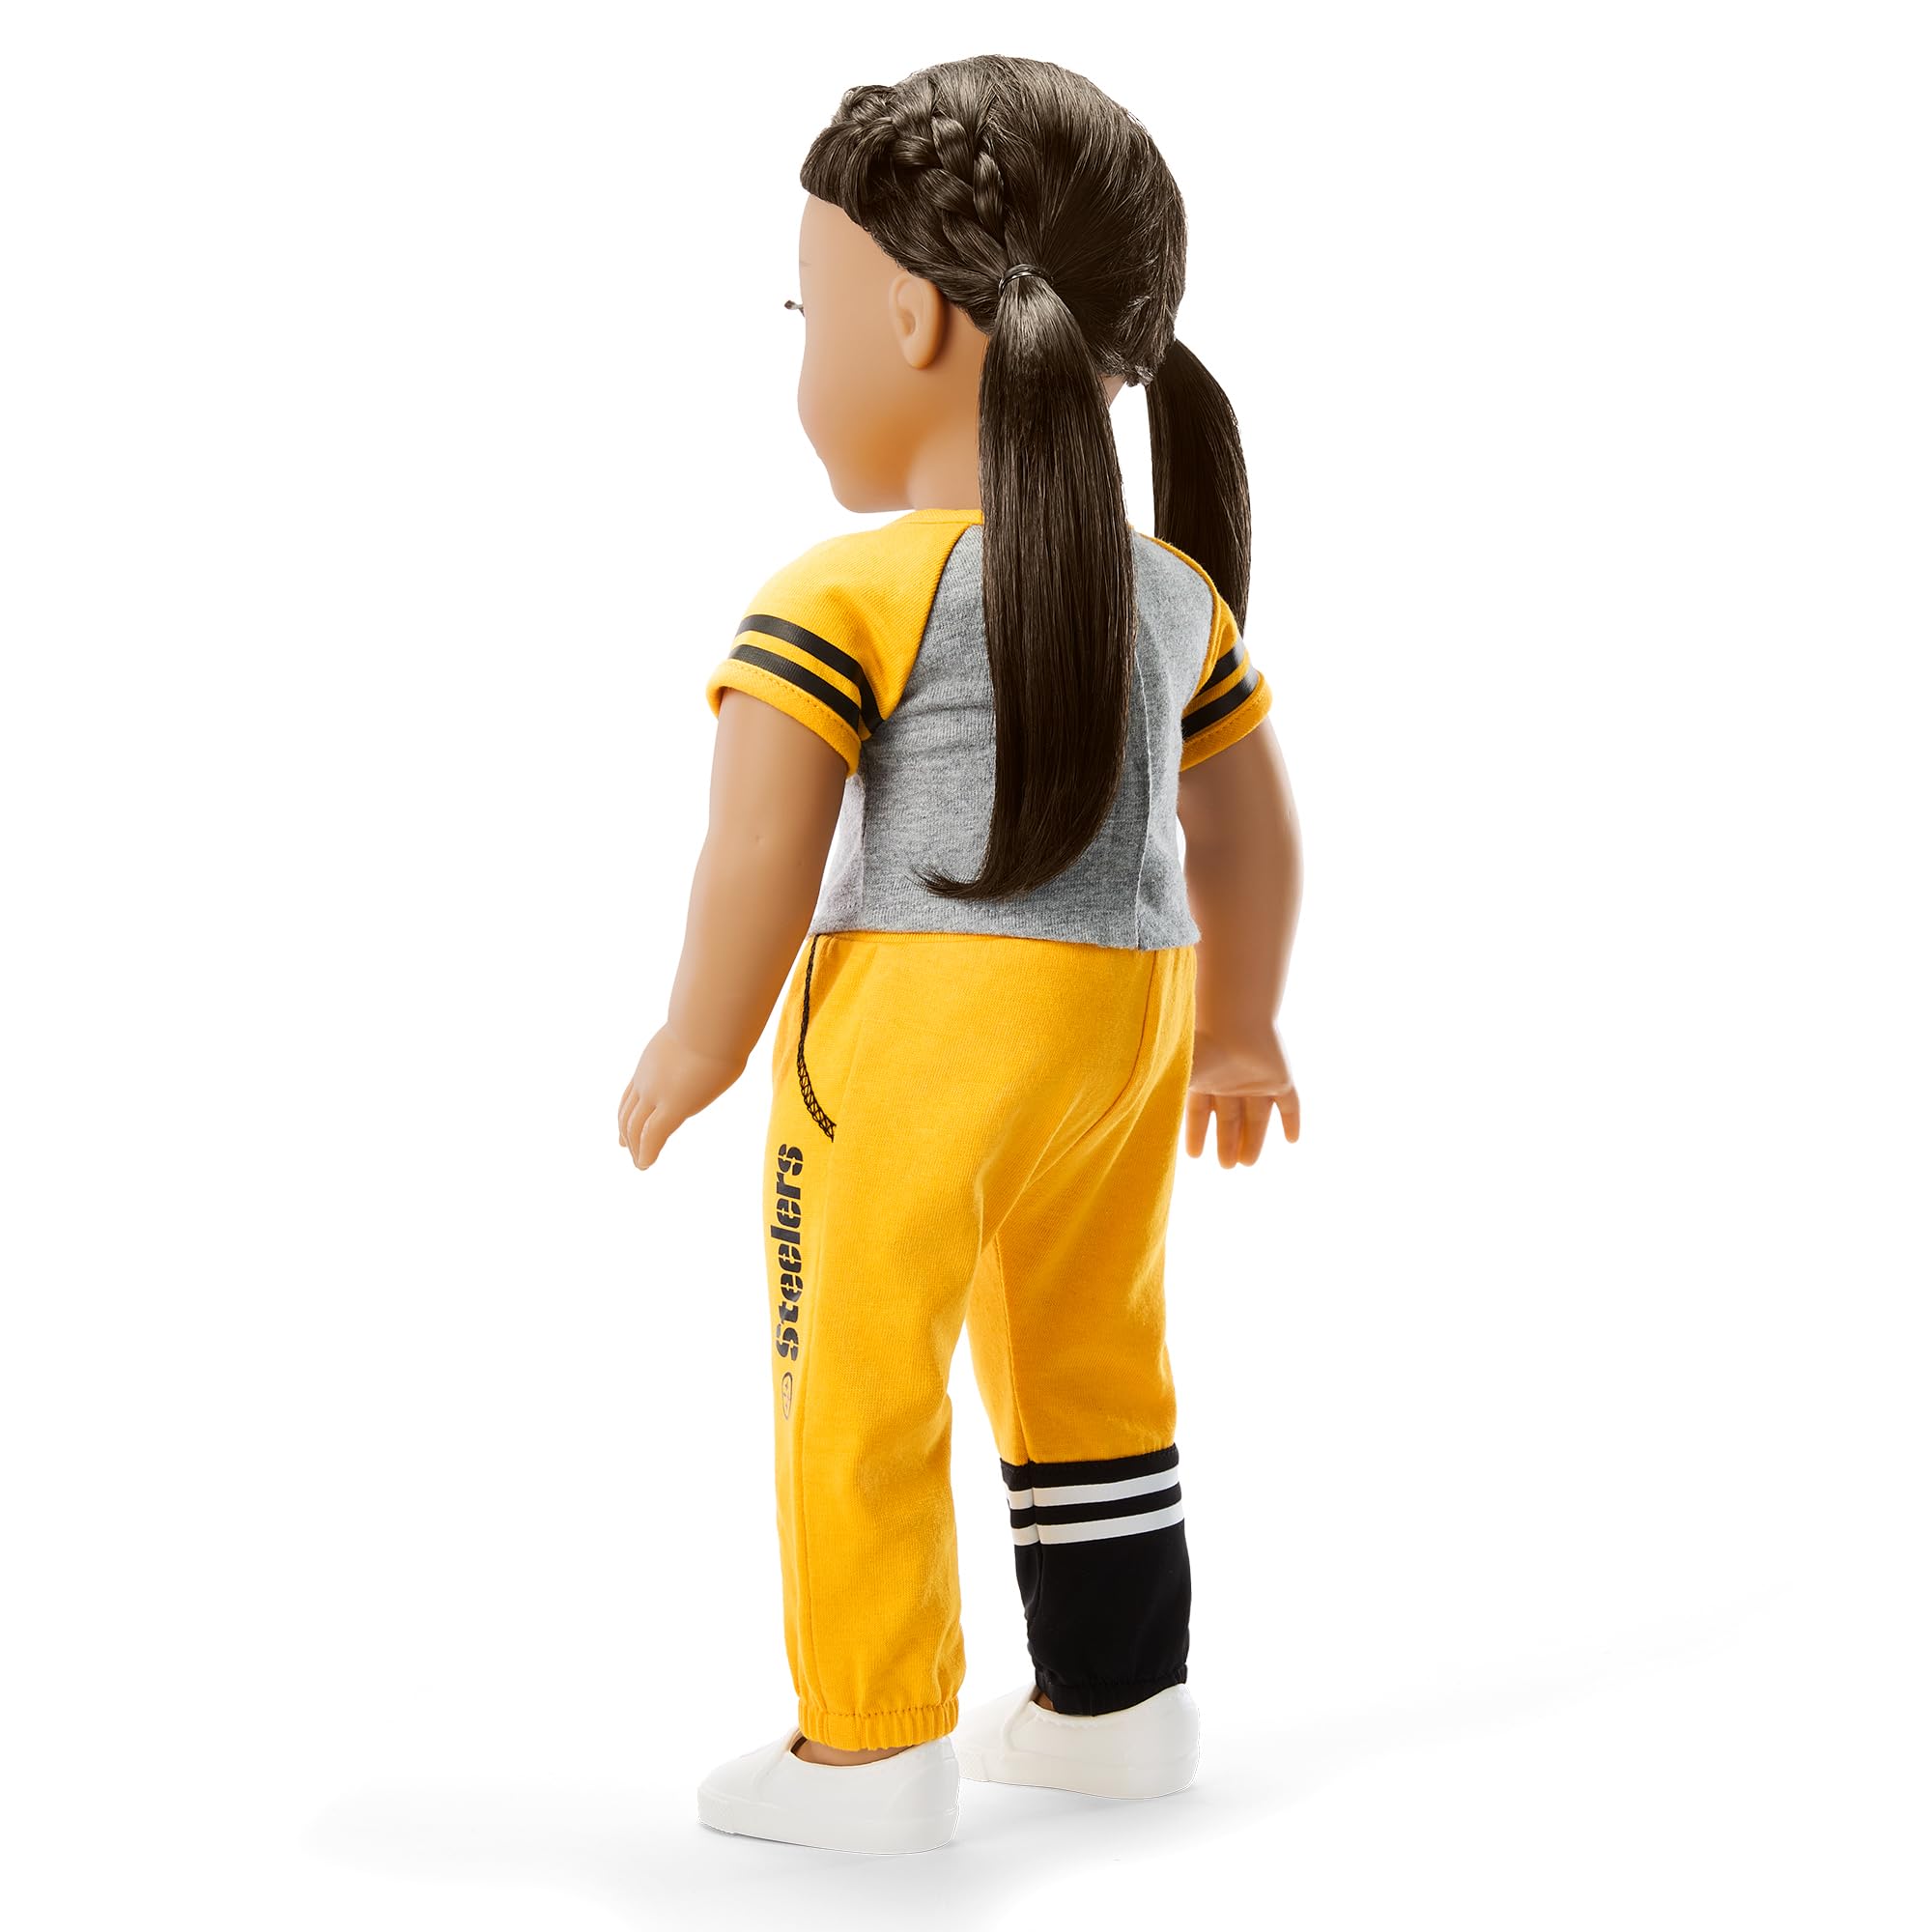 American Girl Pittsburgh Steelers 18 inch Doll Fan Outfit and Accessories, Black and Yellow, 6 pcs, Ages 6+